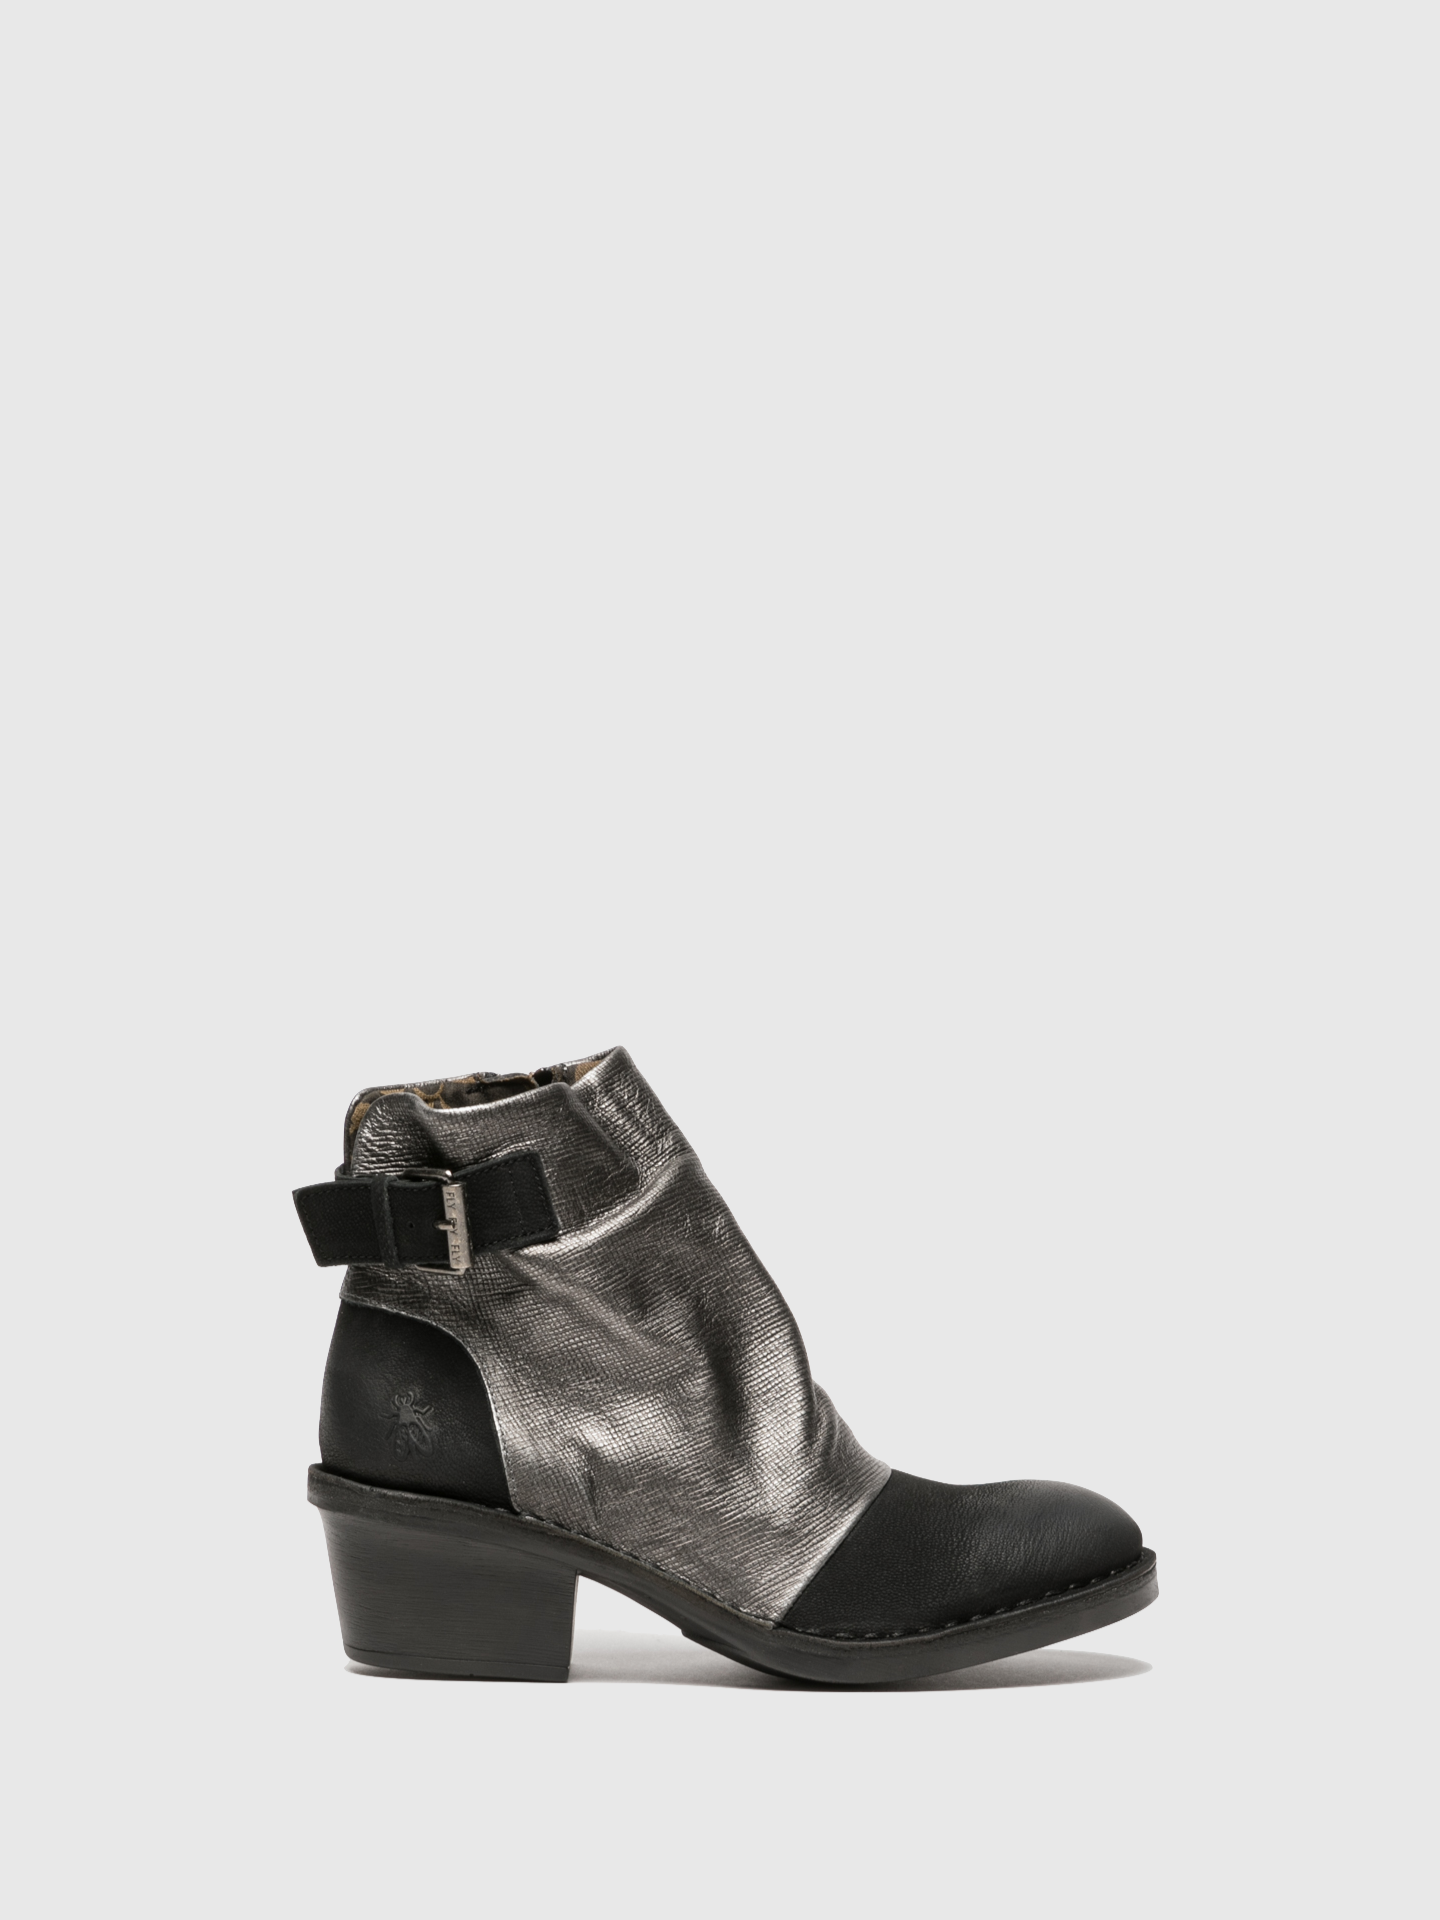 Fly London Silver Buckle Ankle Boots